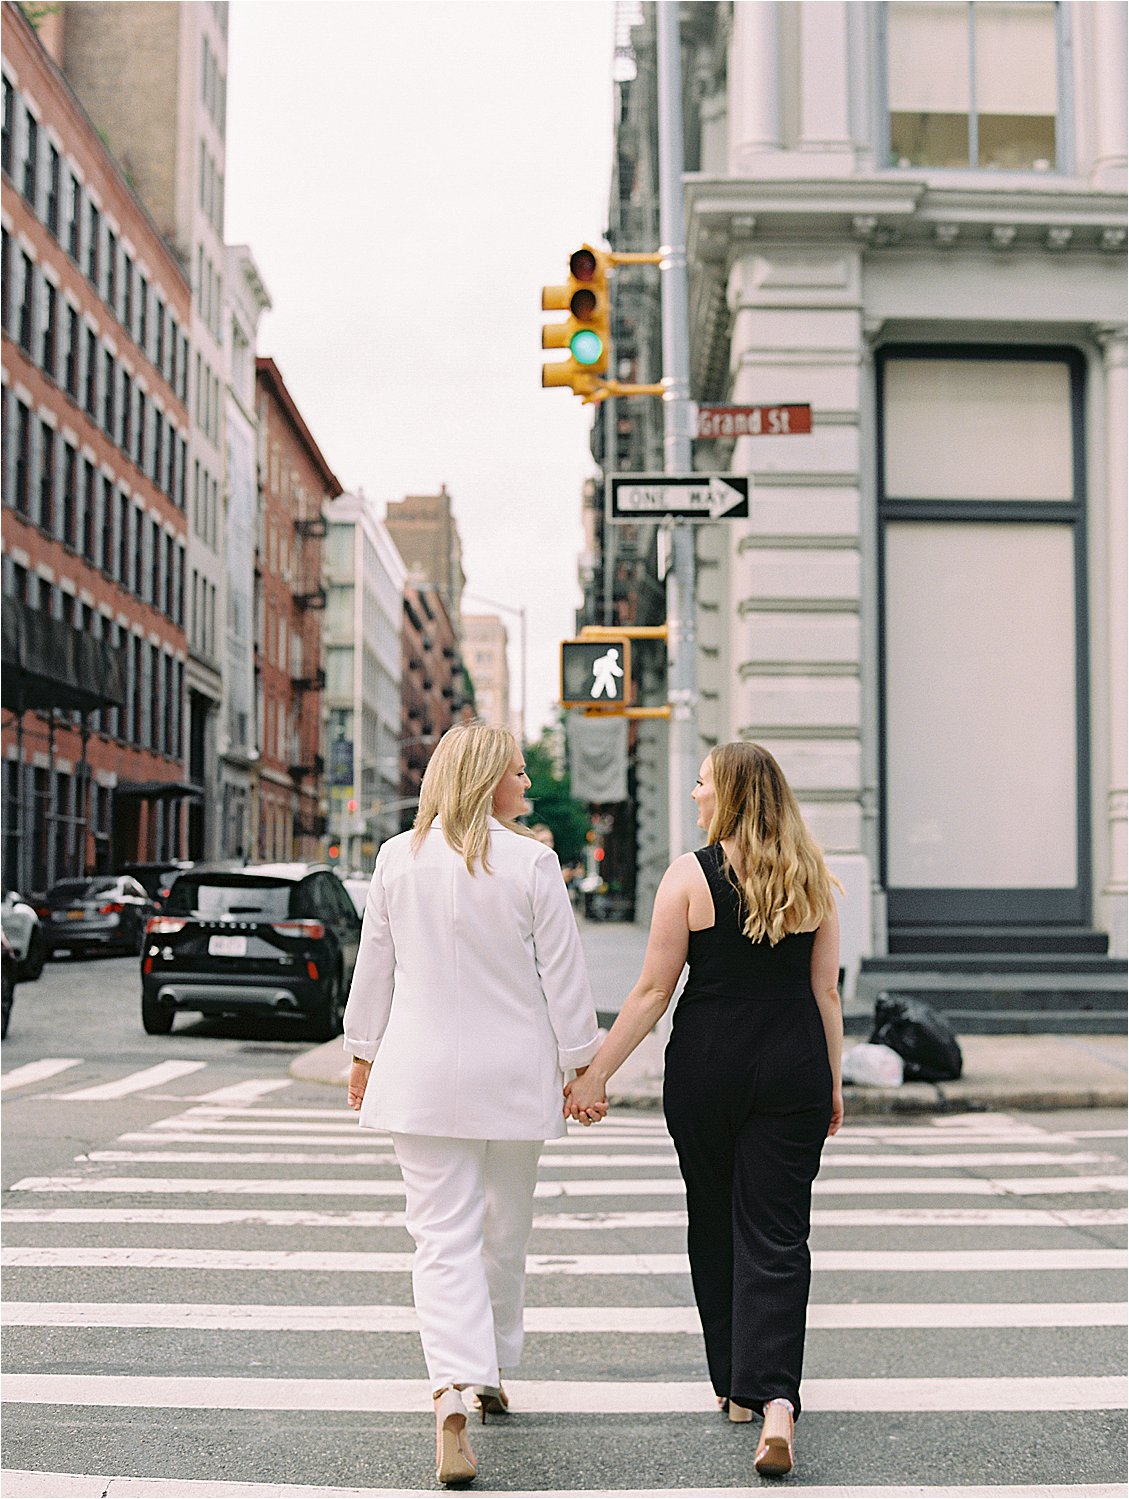 Engagement session in New York City with Film Wedding Photographer Renee Hollingshead